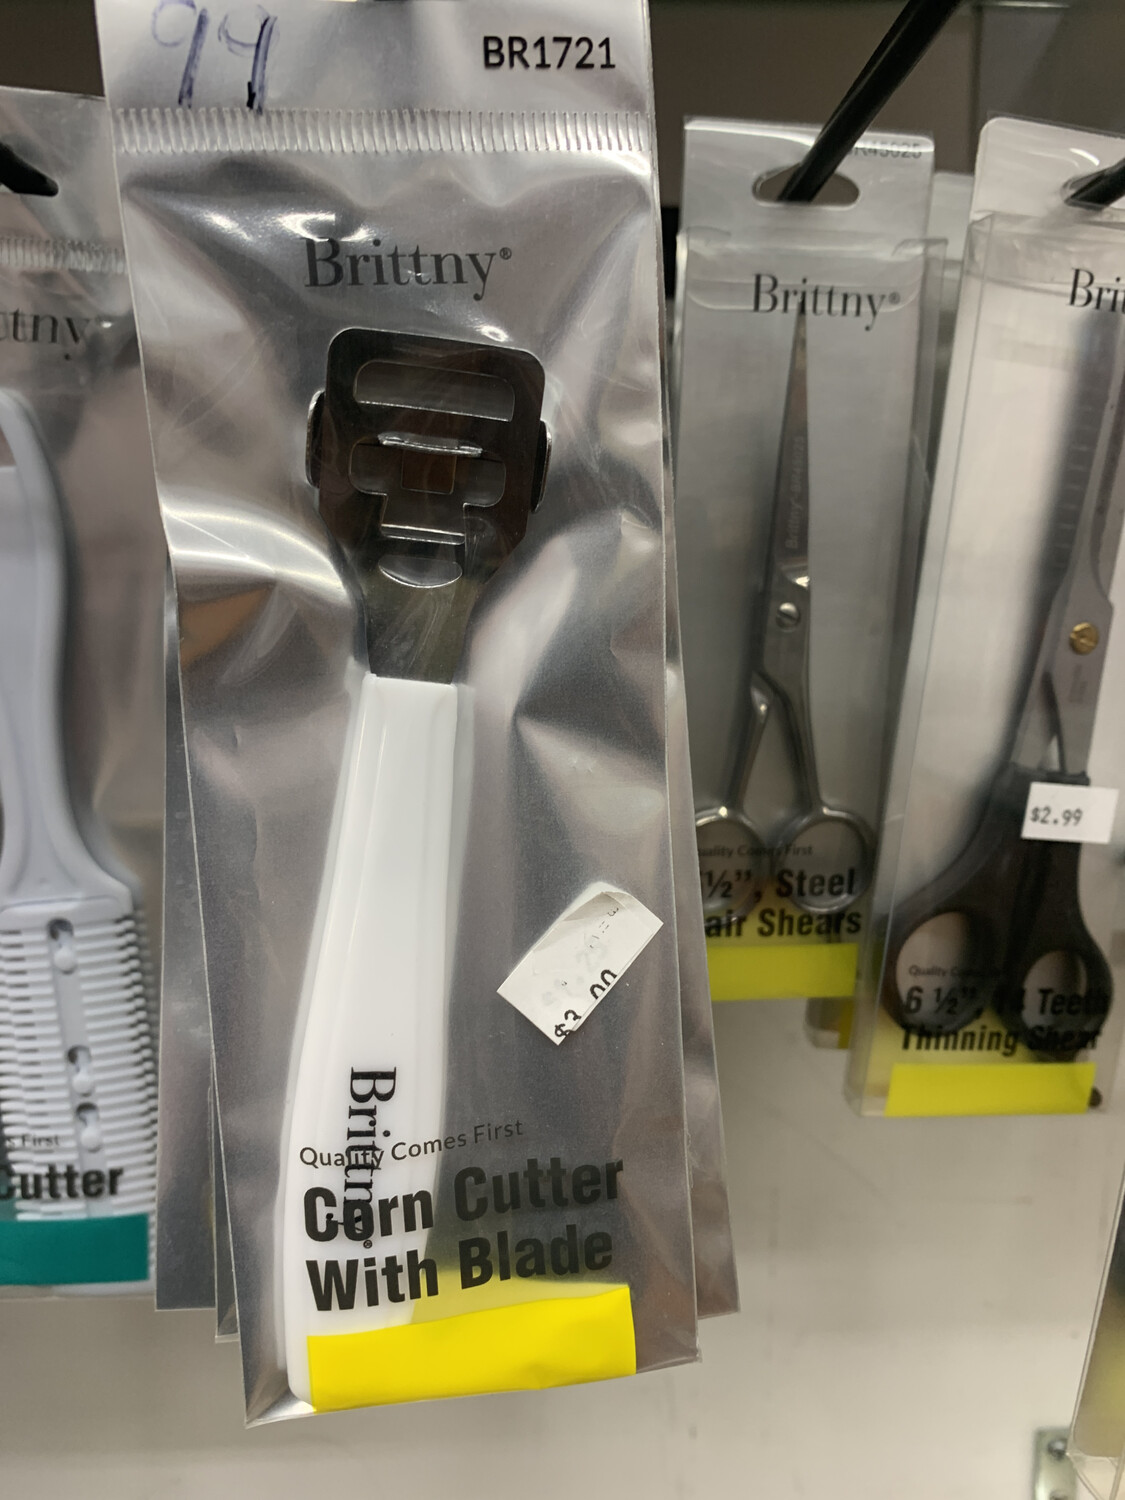 Brittny Corn Cutter With Blade